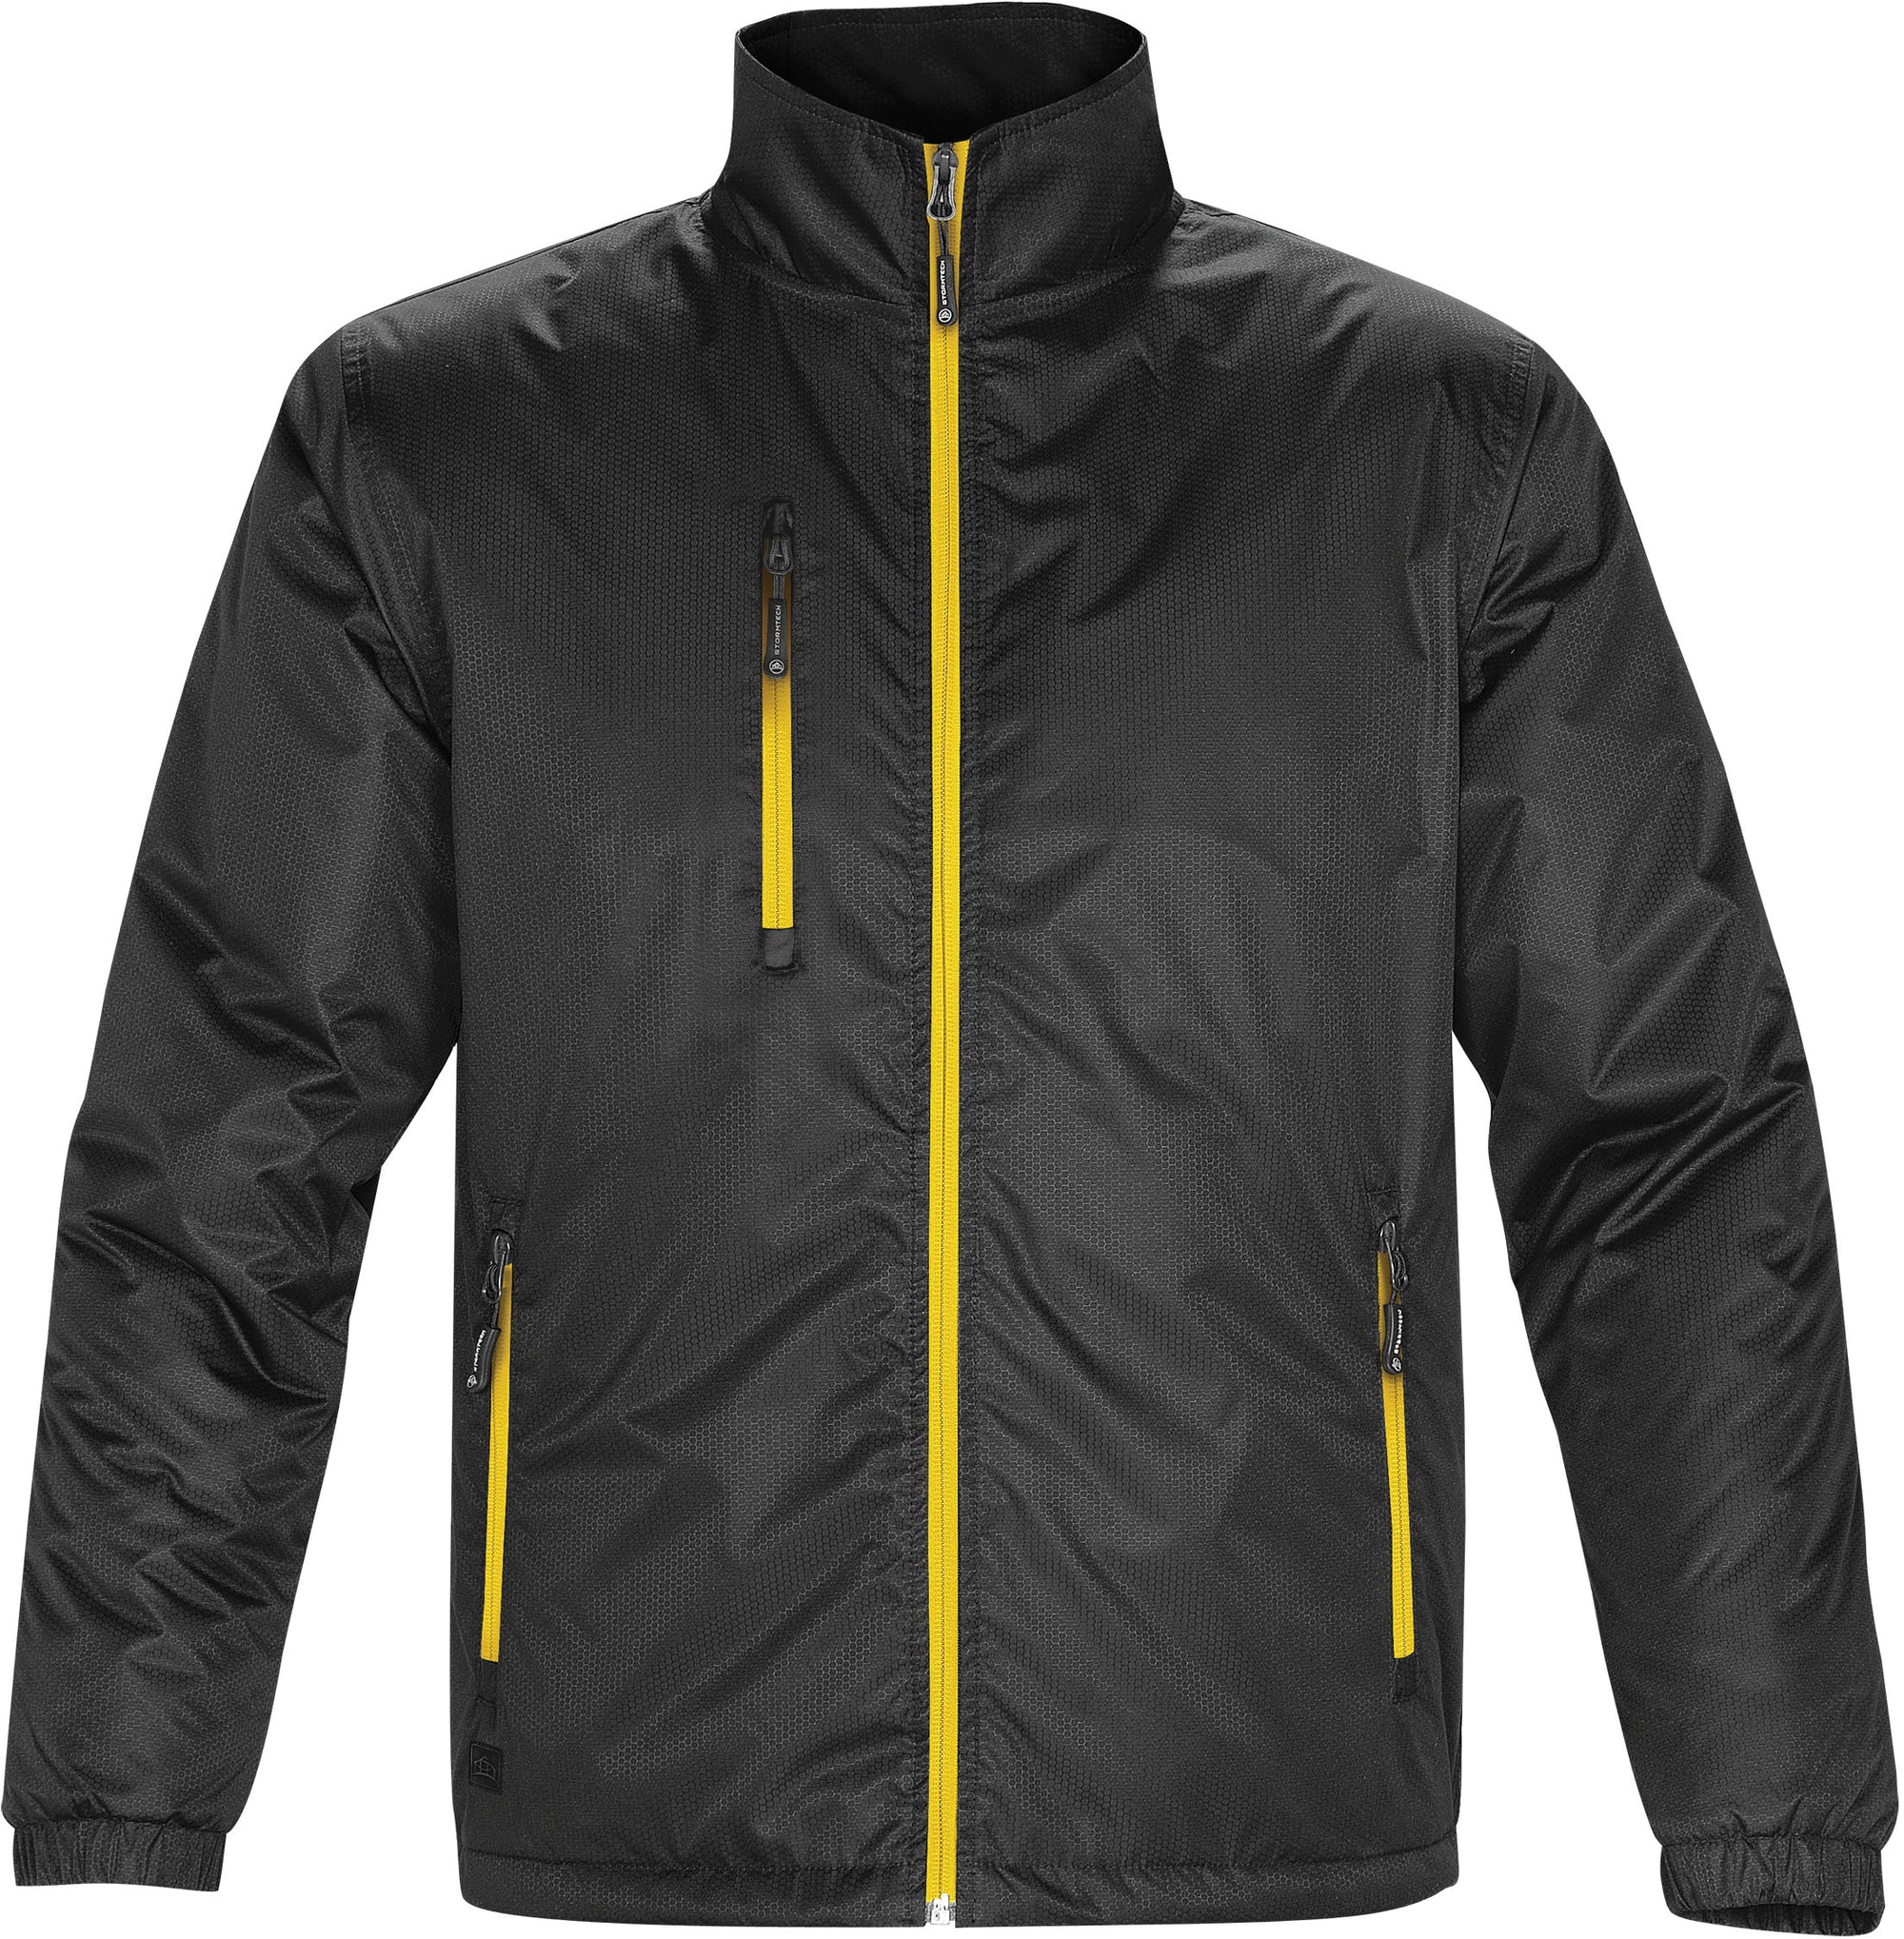 STORMTECH YOUTH AXIS THERMAL SHELL JACKET